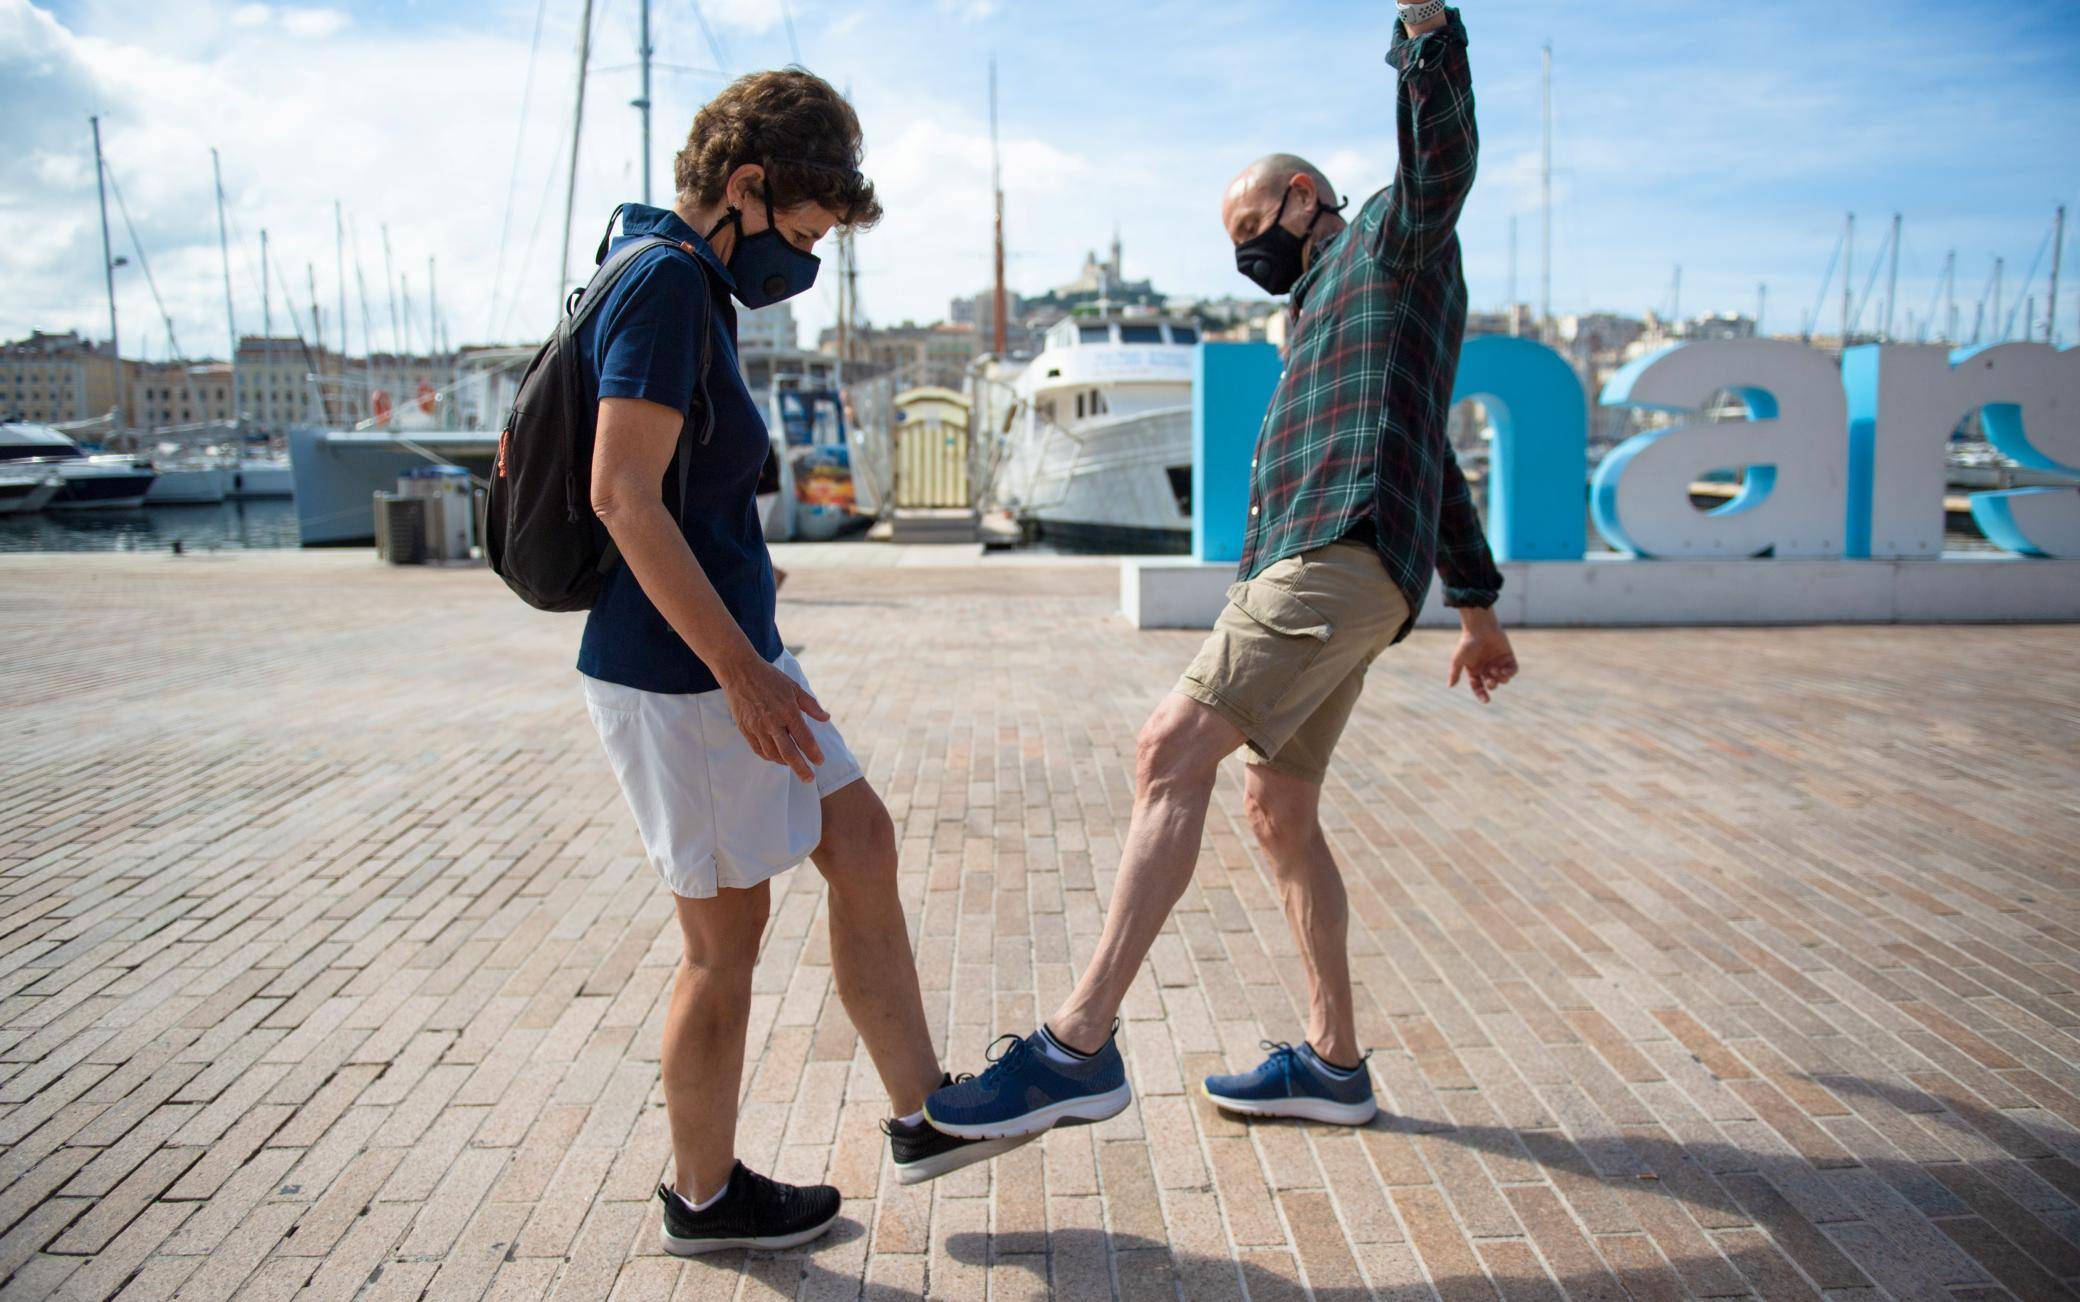 A man and a woman pose as they greet each other with their feet in the Vieux Port of Marseille southern France, on May 17, 2020, in order to use new social distanciation gesture to salute people as a prophylactic measure against the spread of the Covid-19 disease caused by the novel coronavirus. (Photo by CLEMENT MAHOUDEAU / AFP) (Photo by CLEMENT MAHOUDEAU/AFP via Getty Images)